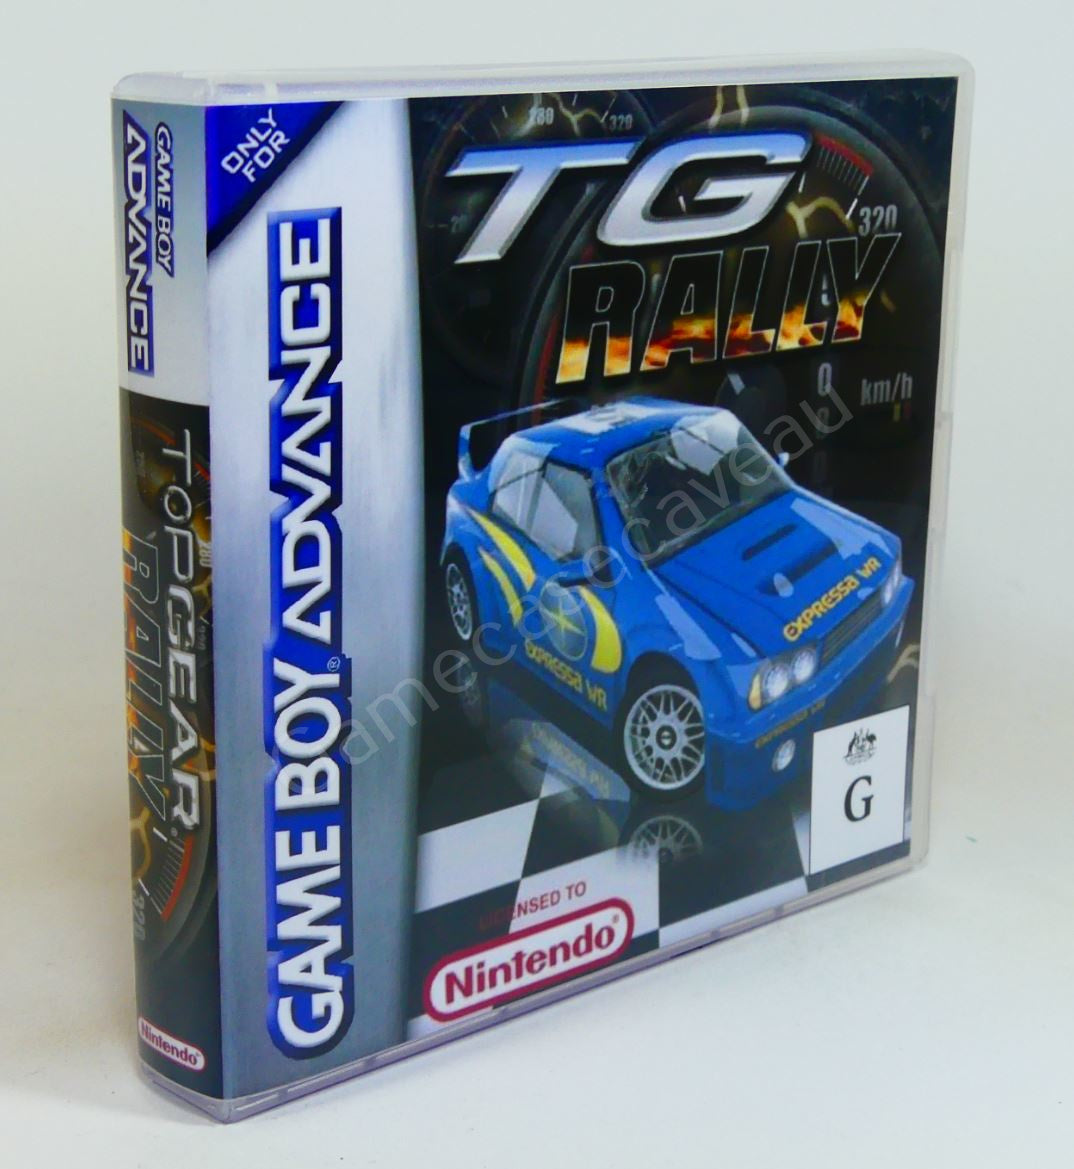 Top Gear Rally - GBA Replacement Case